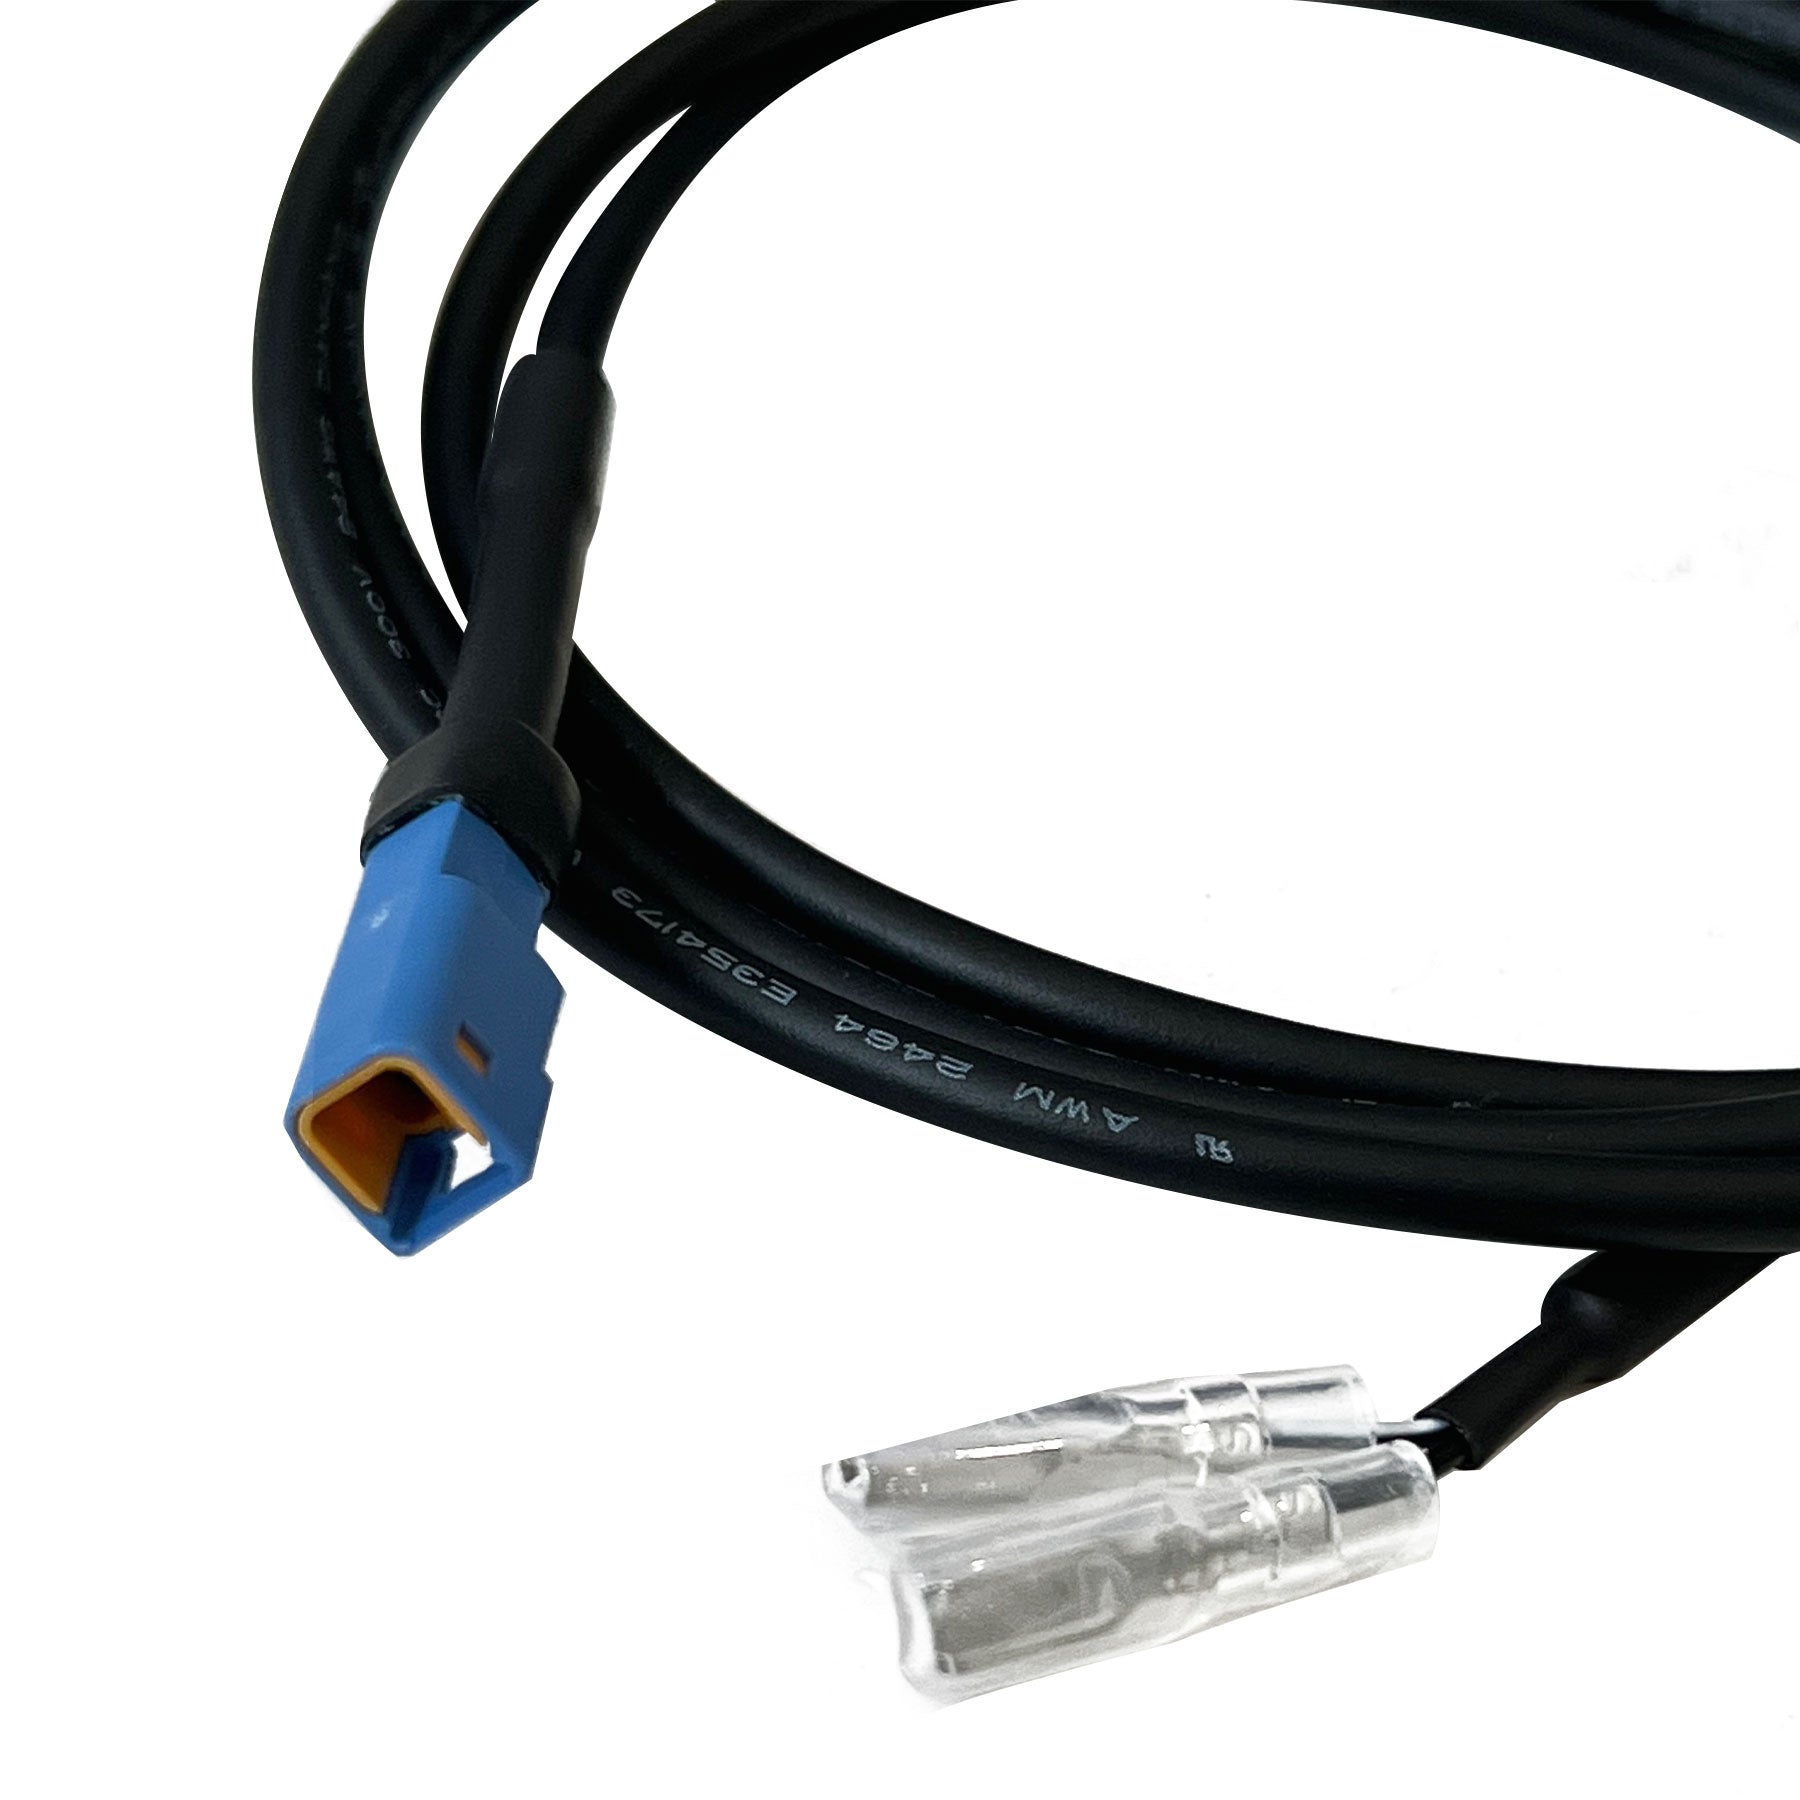 Bafang G510 Mid Motor Light Cable